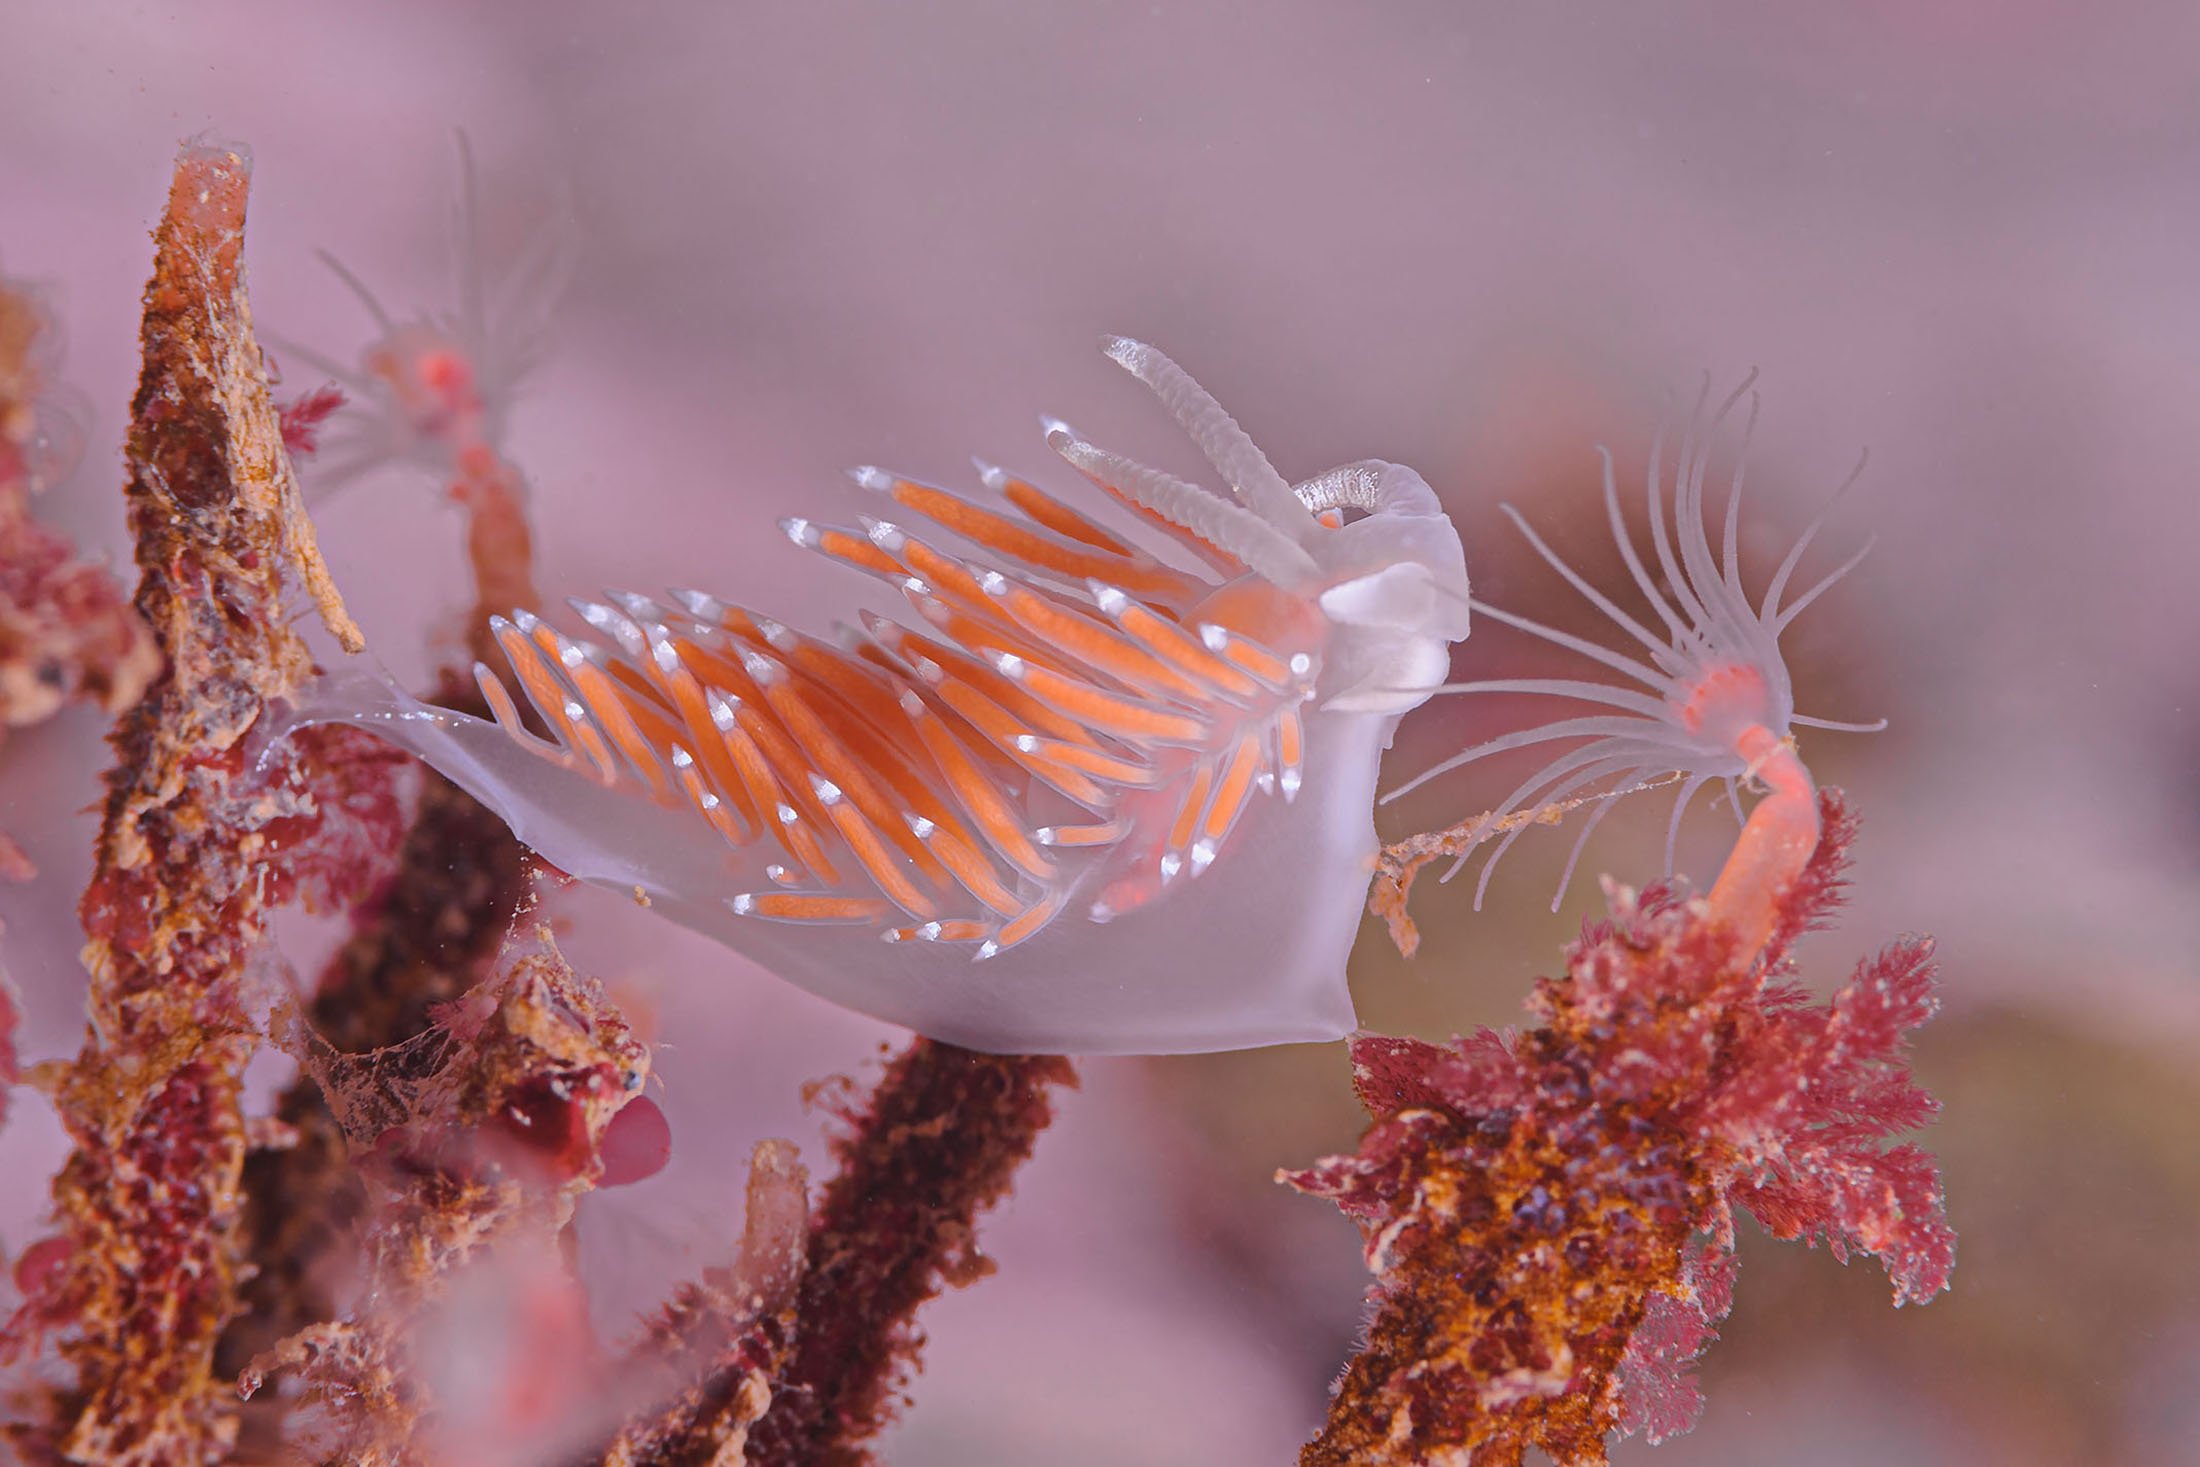   Nudibranch eating hydroid © Andrew Martinez.  